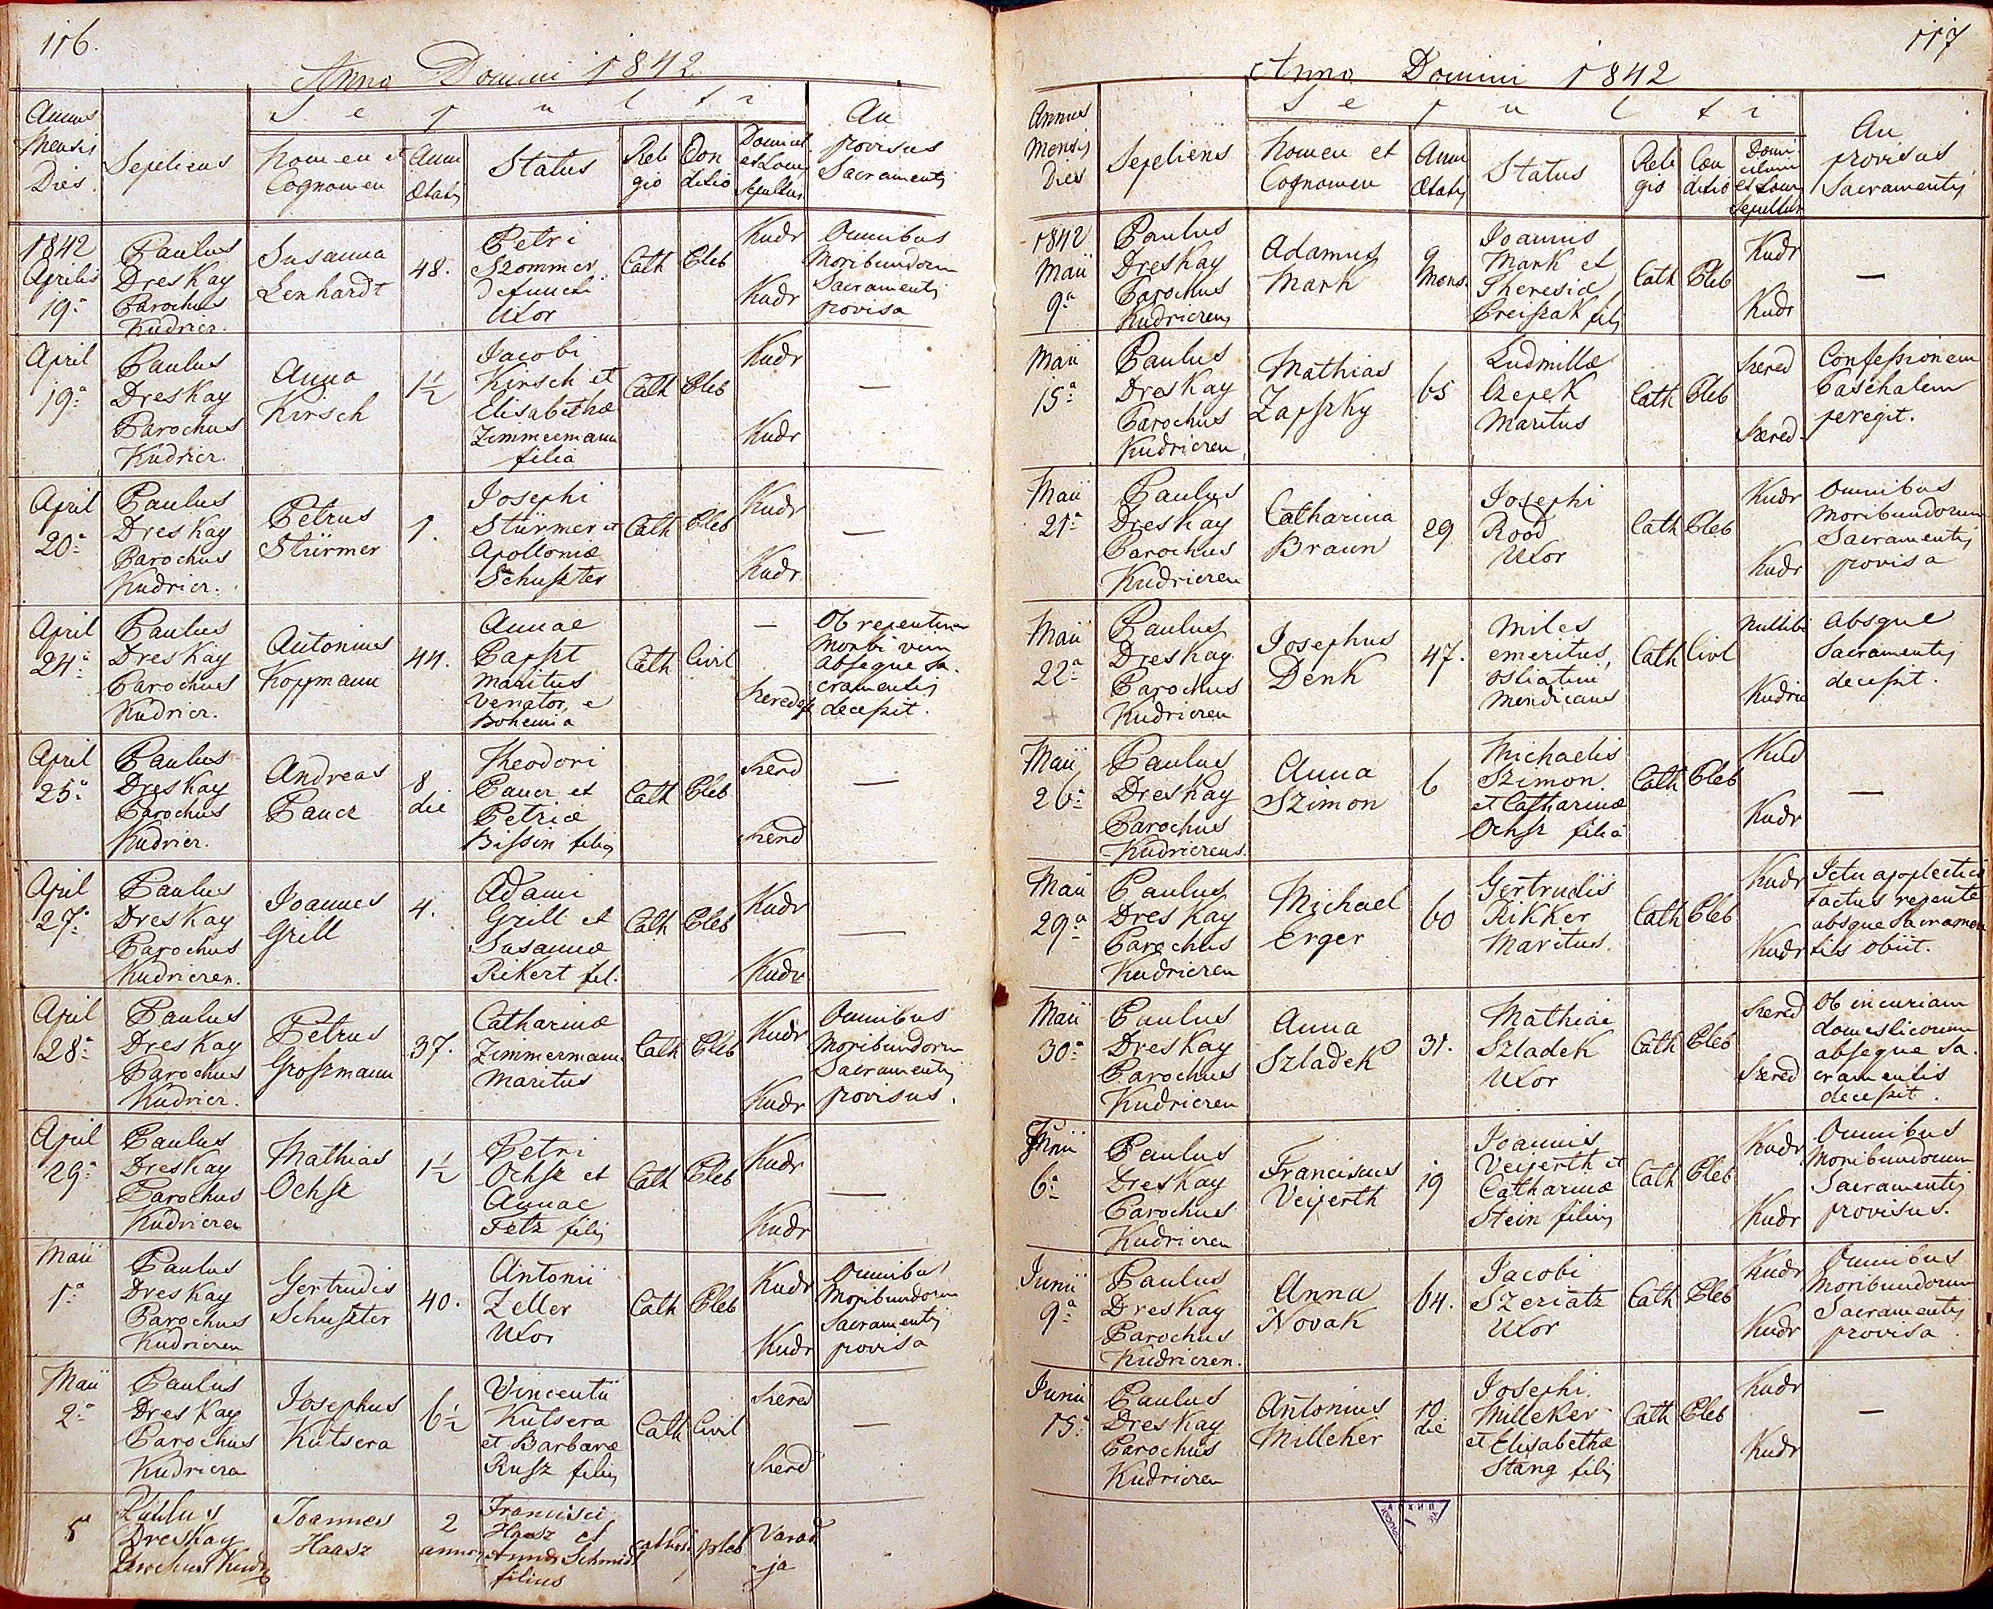 images/church_records/DEATHS/1775-1828D/116 i 117